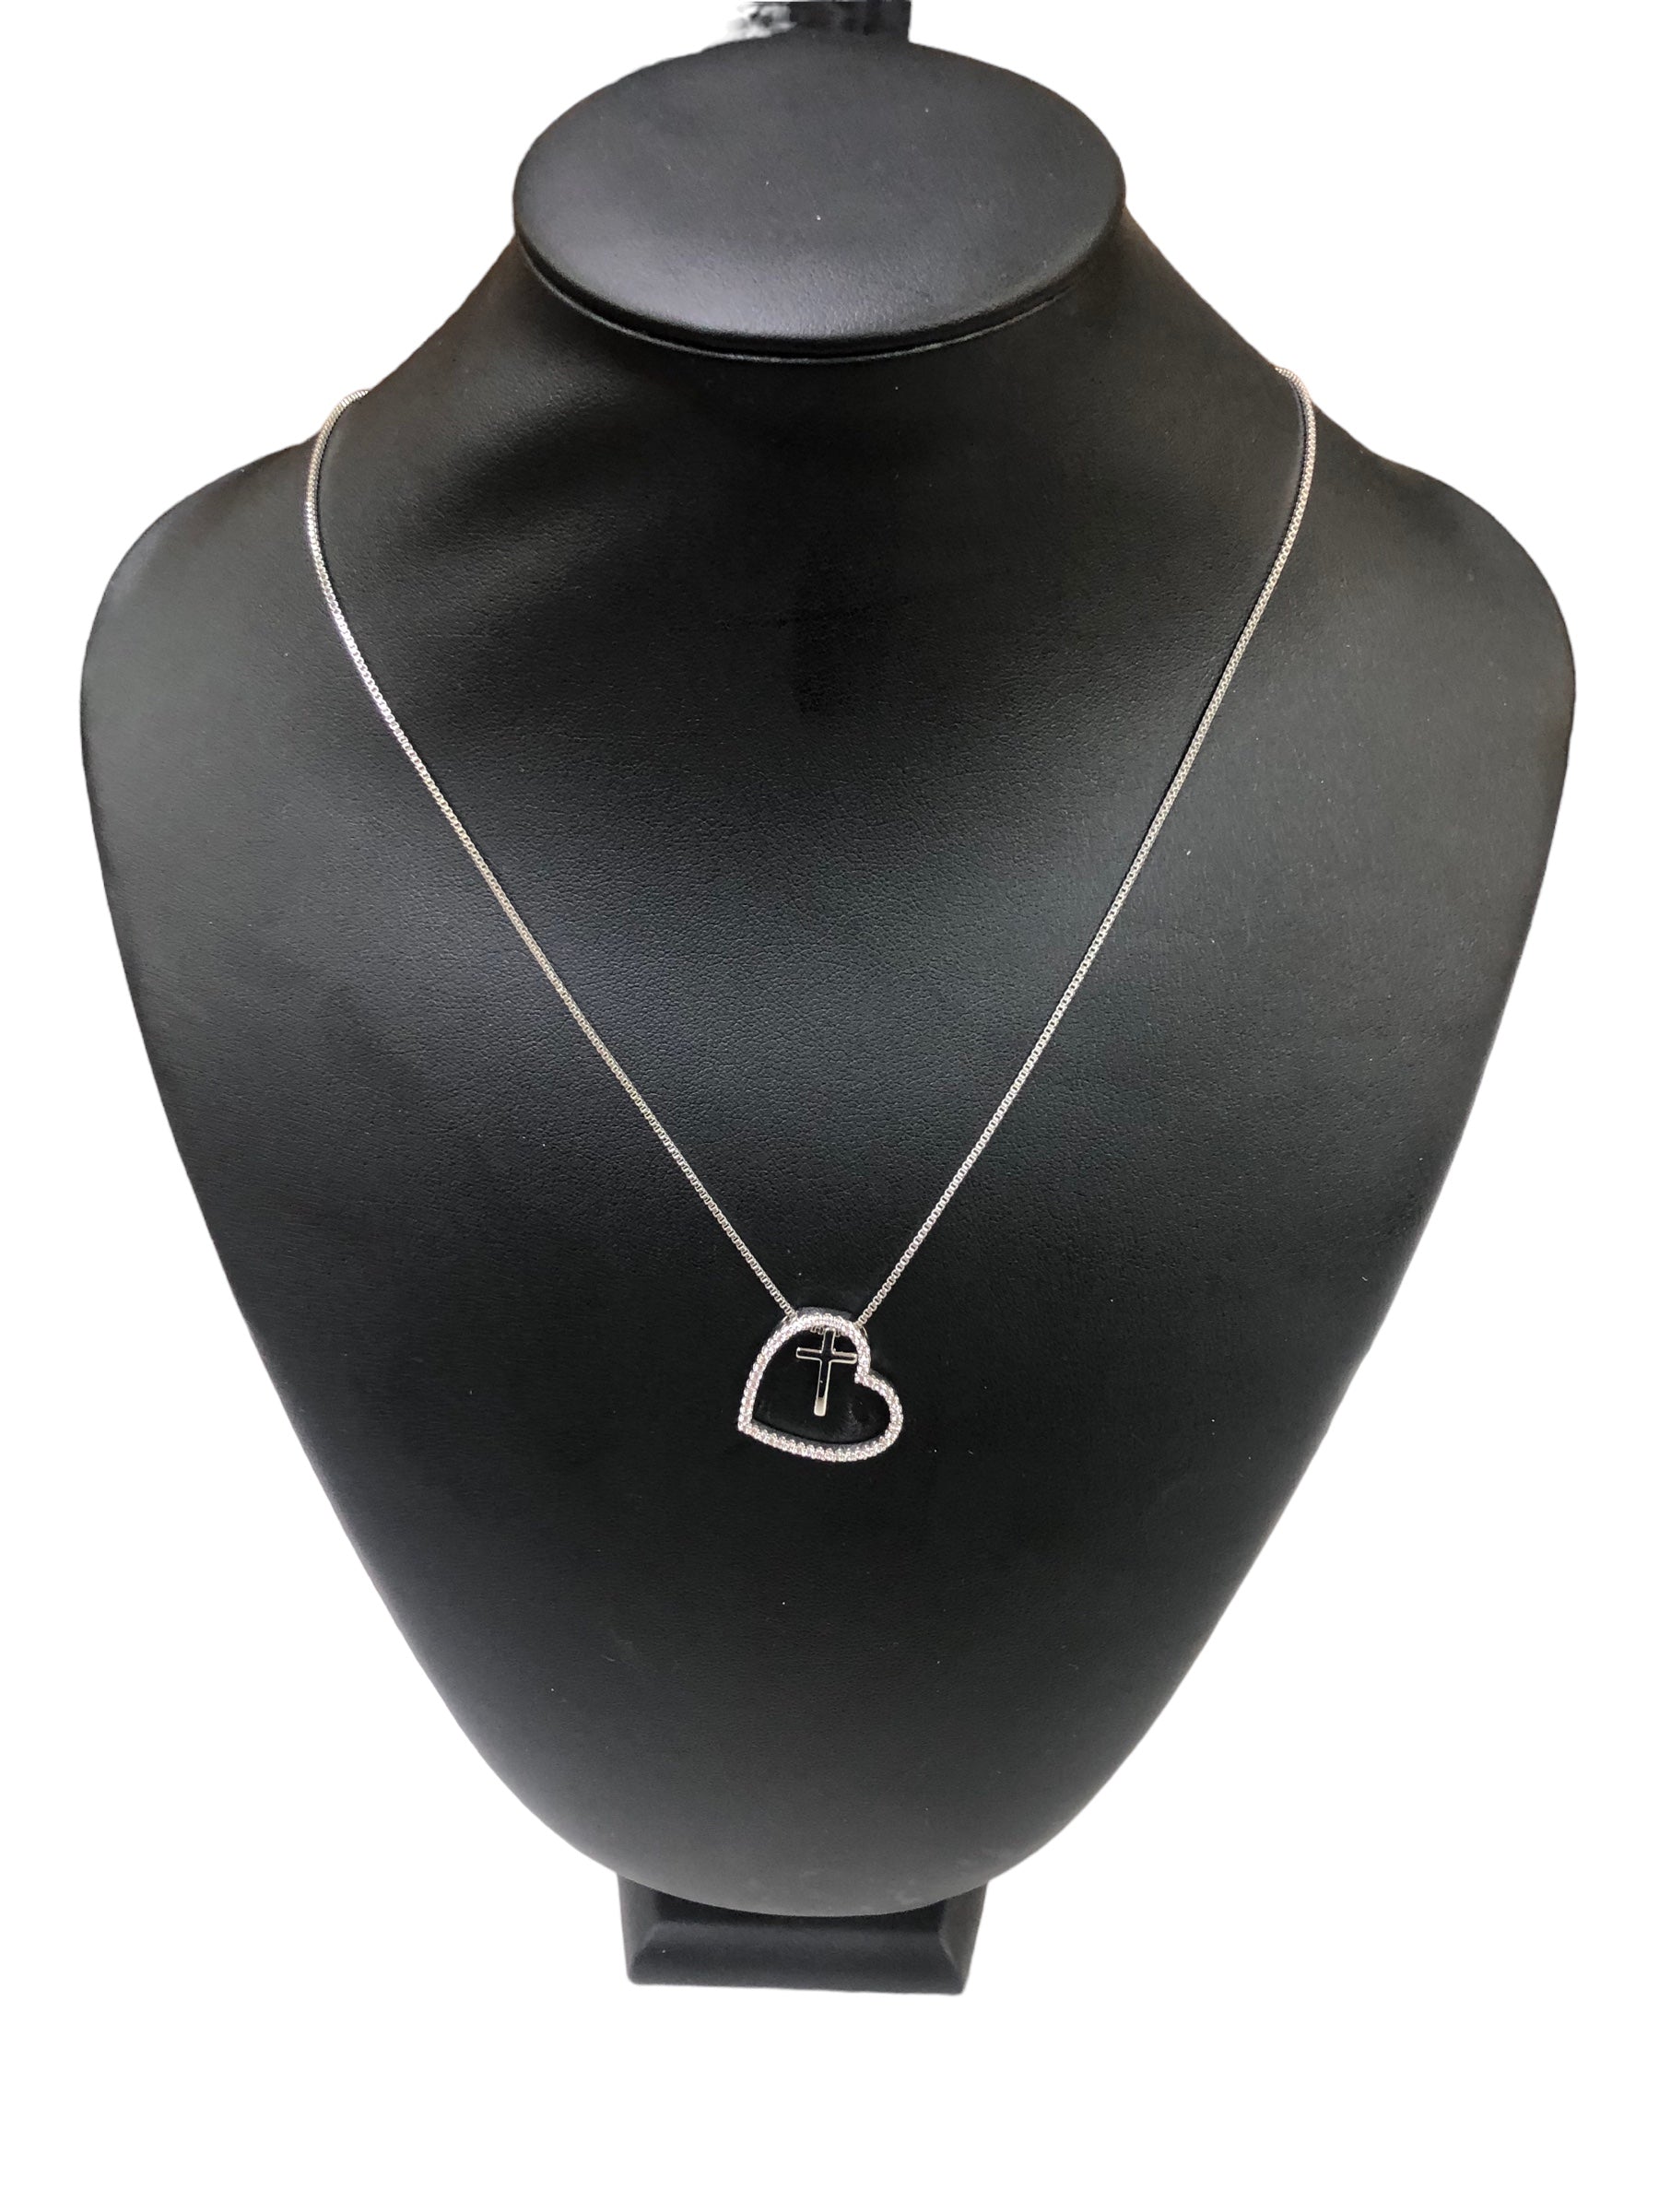 Necklace silver-W/